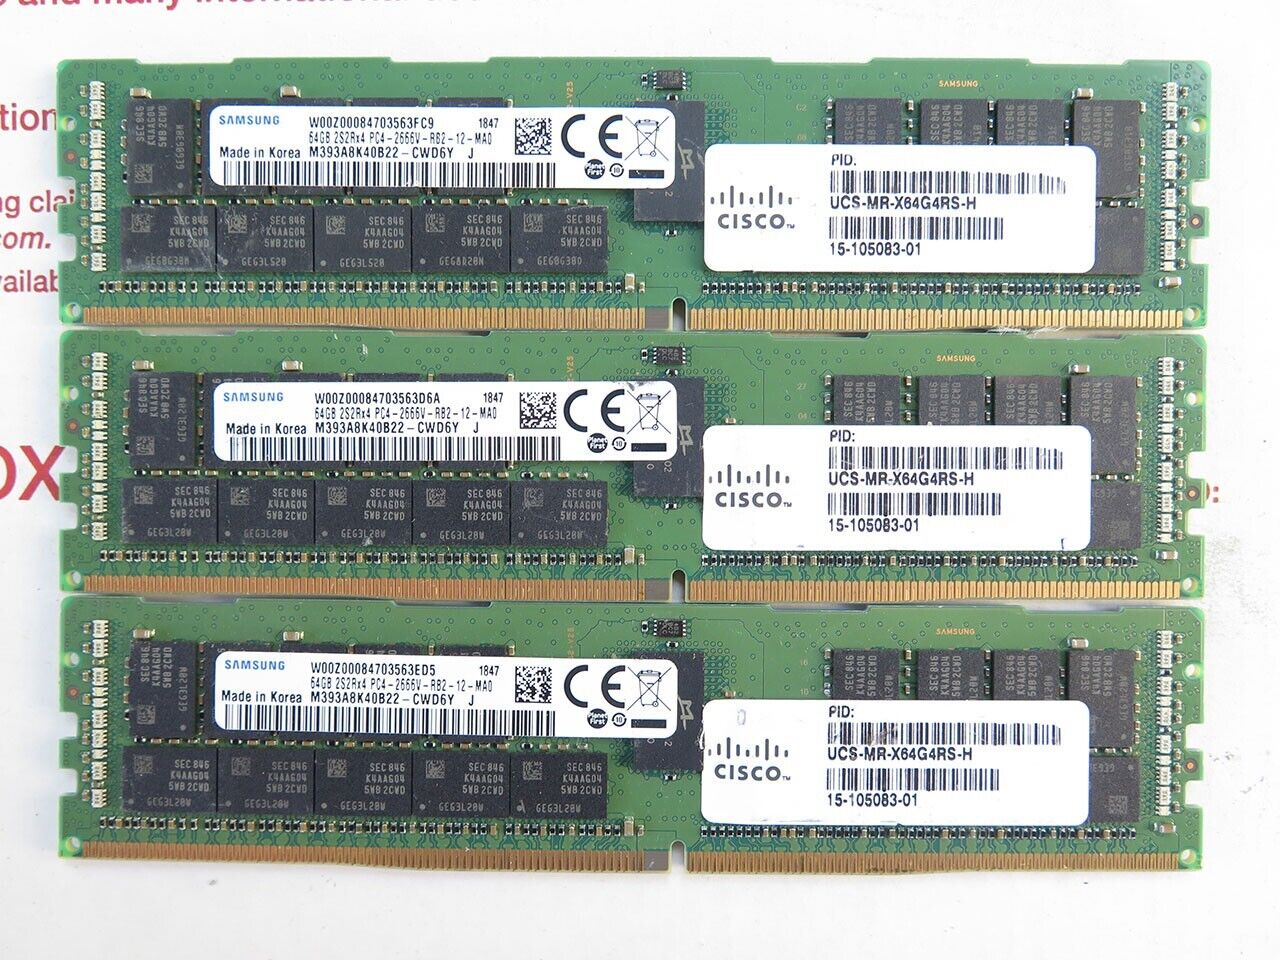 Lot of 3 x 64GB PC4-21300 2666Mhz ECC RDIMM 4Rx4 Cisco # UCS-MR-X64G4RS-H